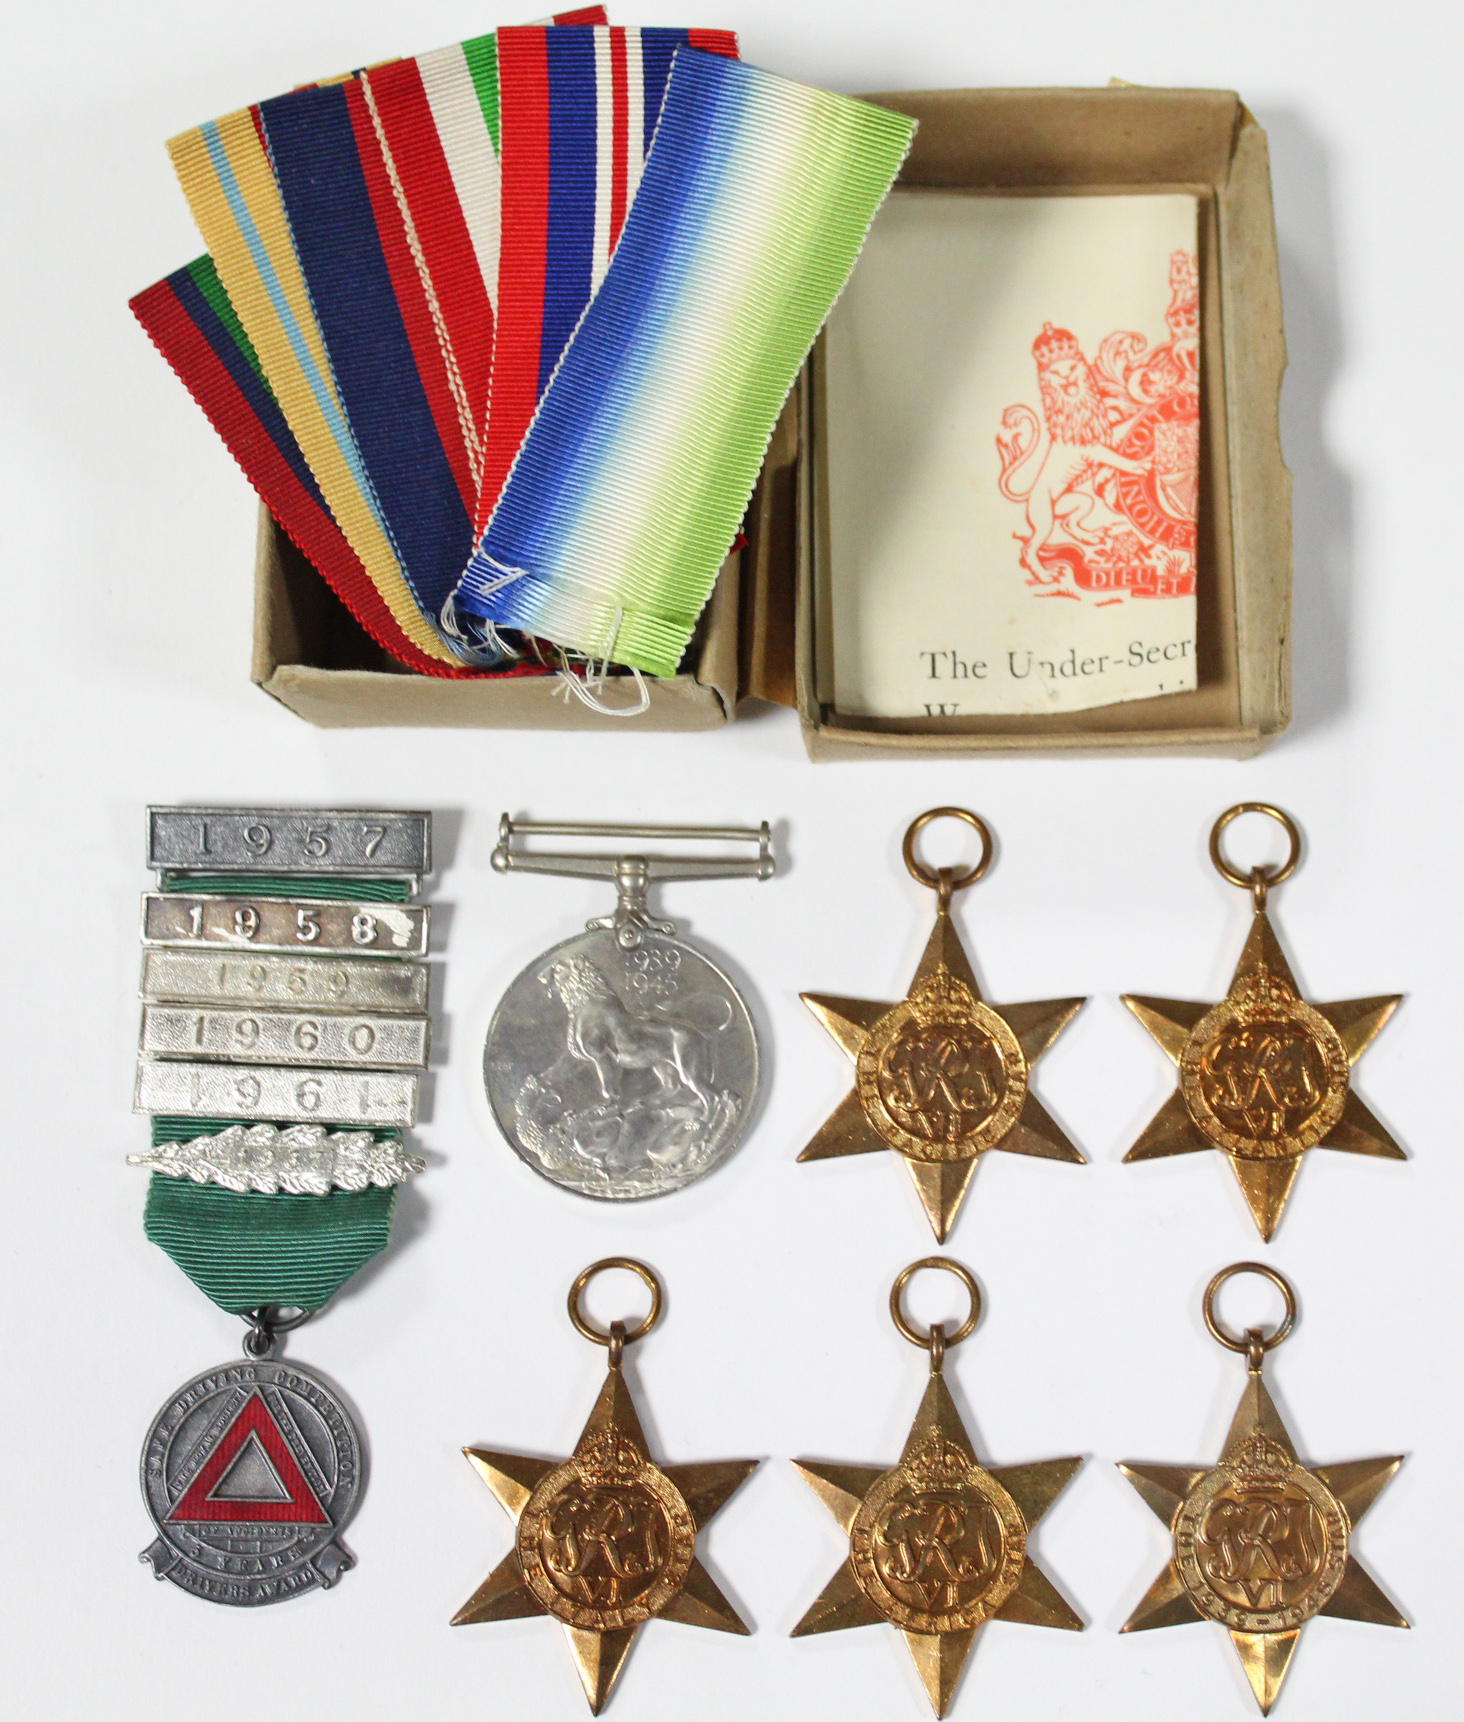 A group of six WWII medals: 1939-45 Star, Atlantic Star, Africa Star, Pacific Star, Italy Star, &